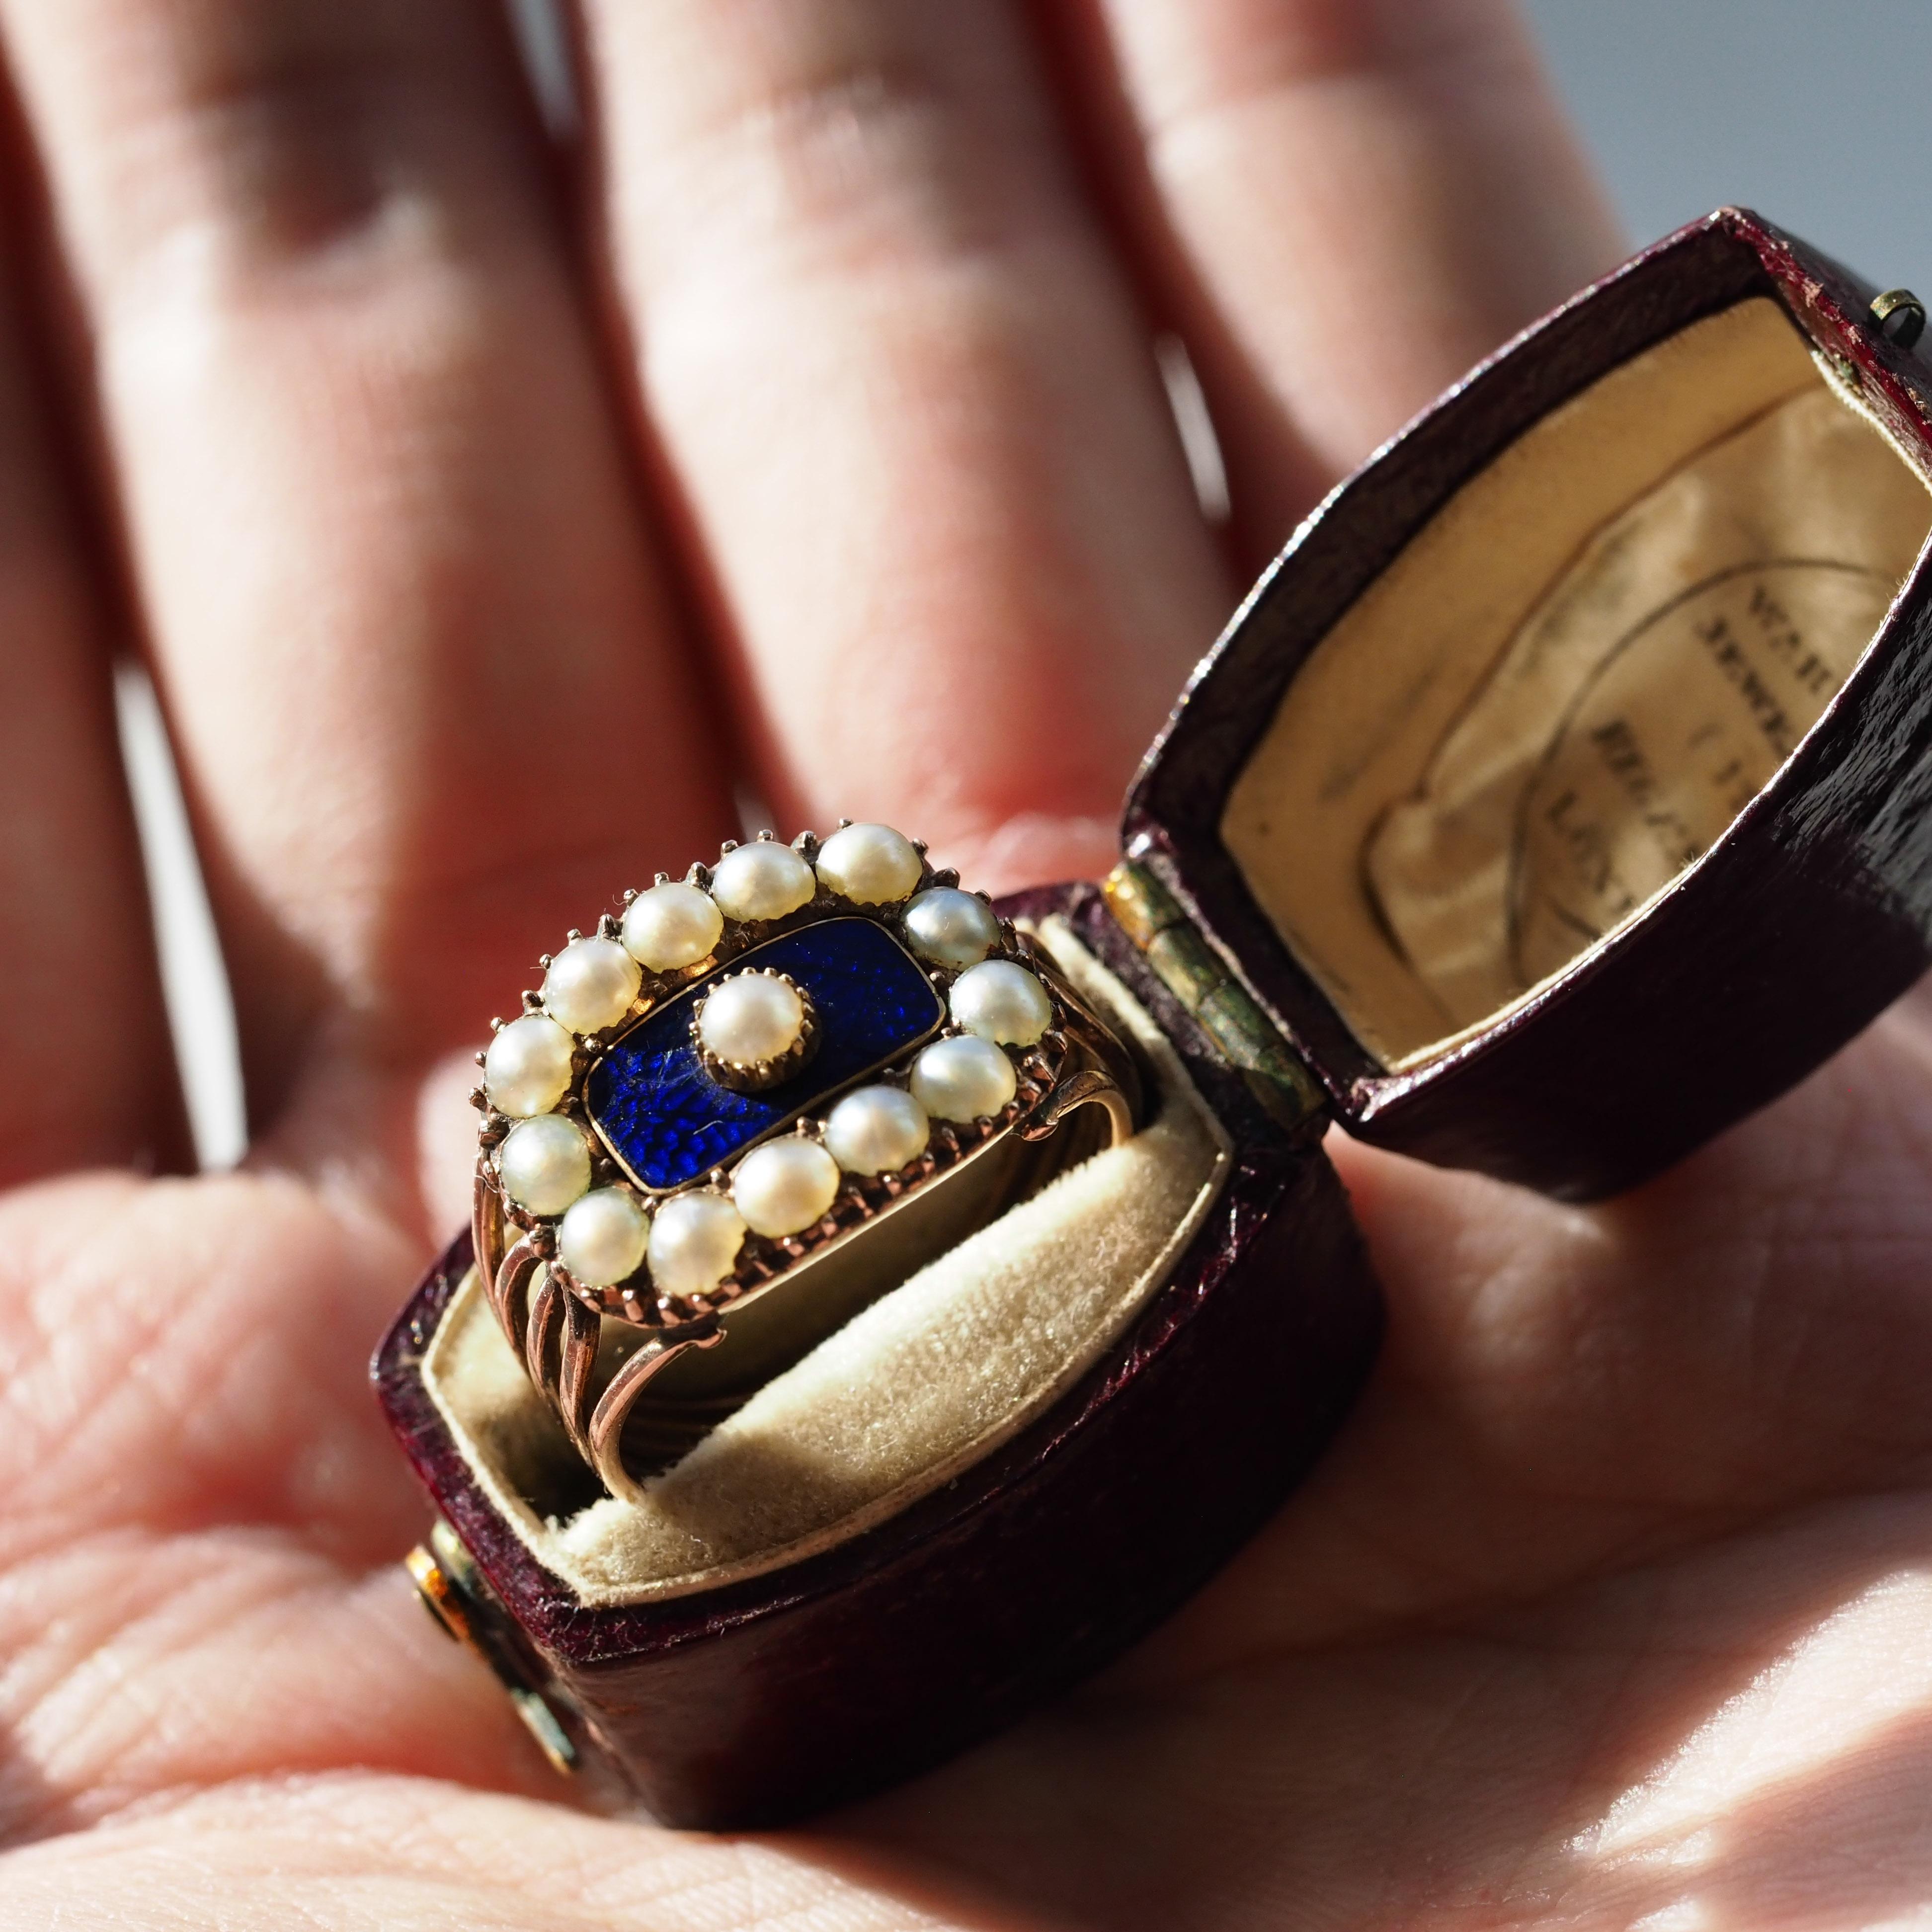 We are delighted to offer this exquisite antique Georgian ring made c.1800. 
 
This ring comes with its period fitted box (included in the listing) and is a wonderful example of fine Georgian jewellery. 
 
The ring features an unmissable and